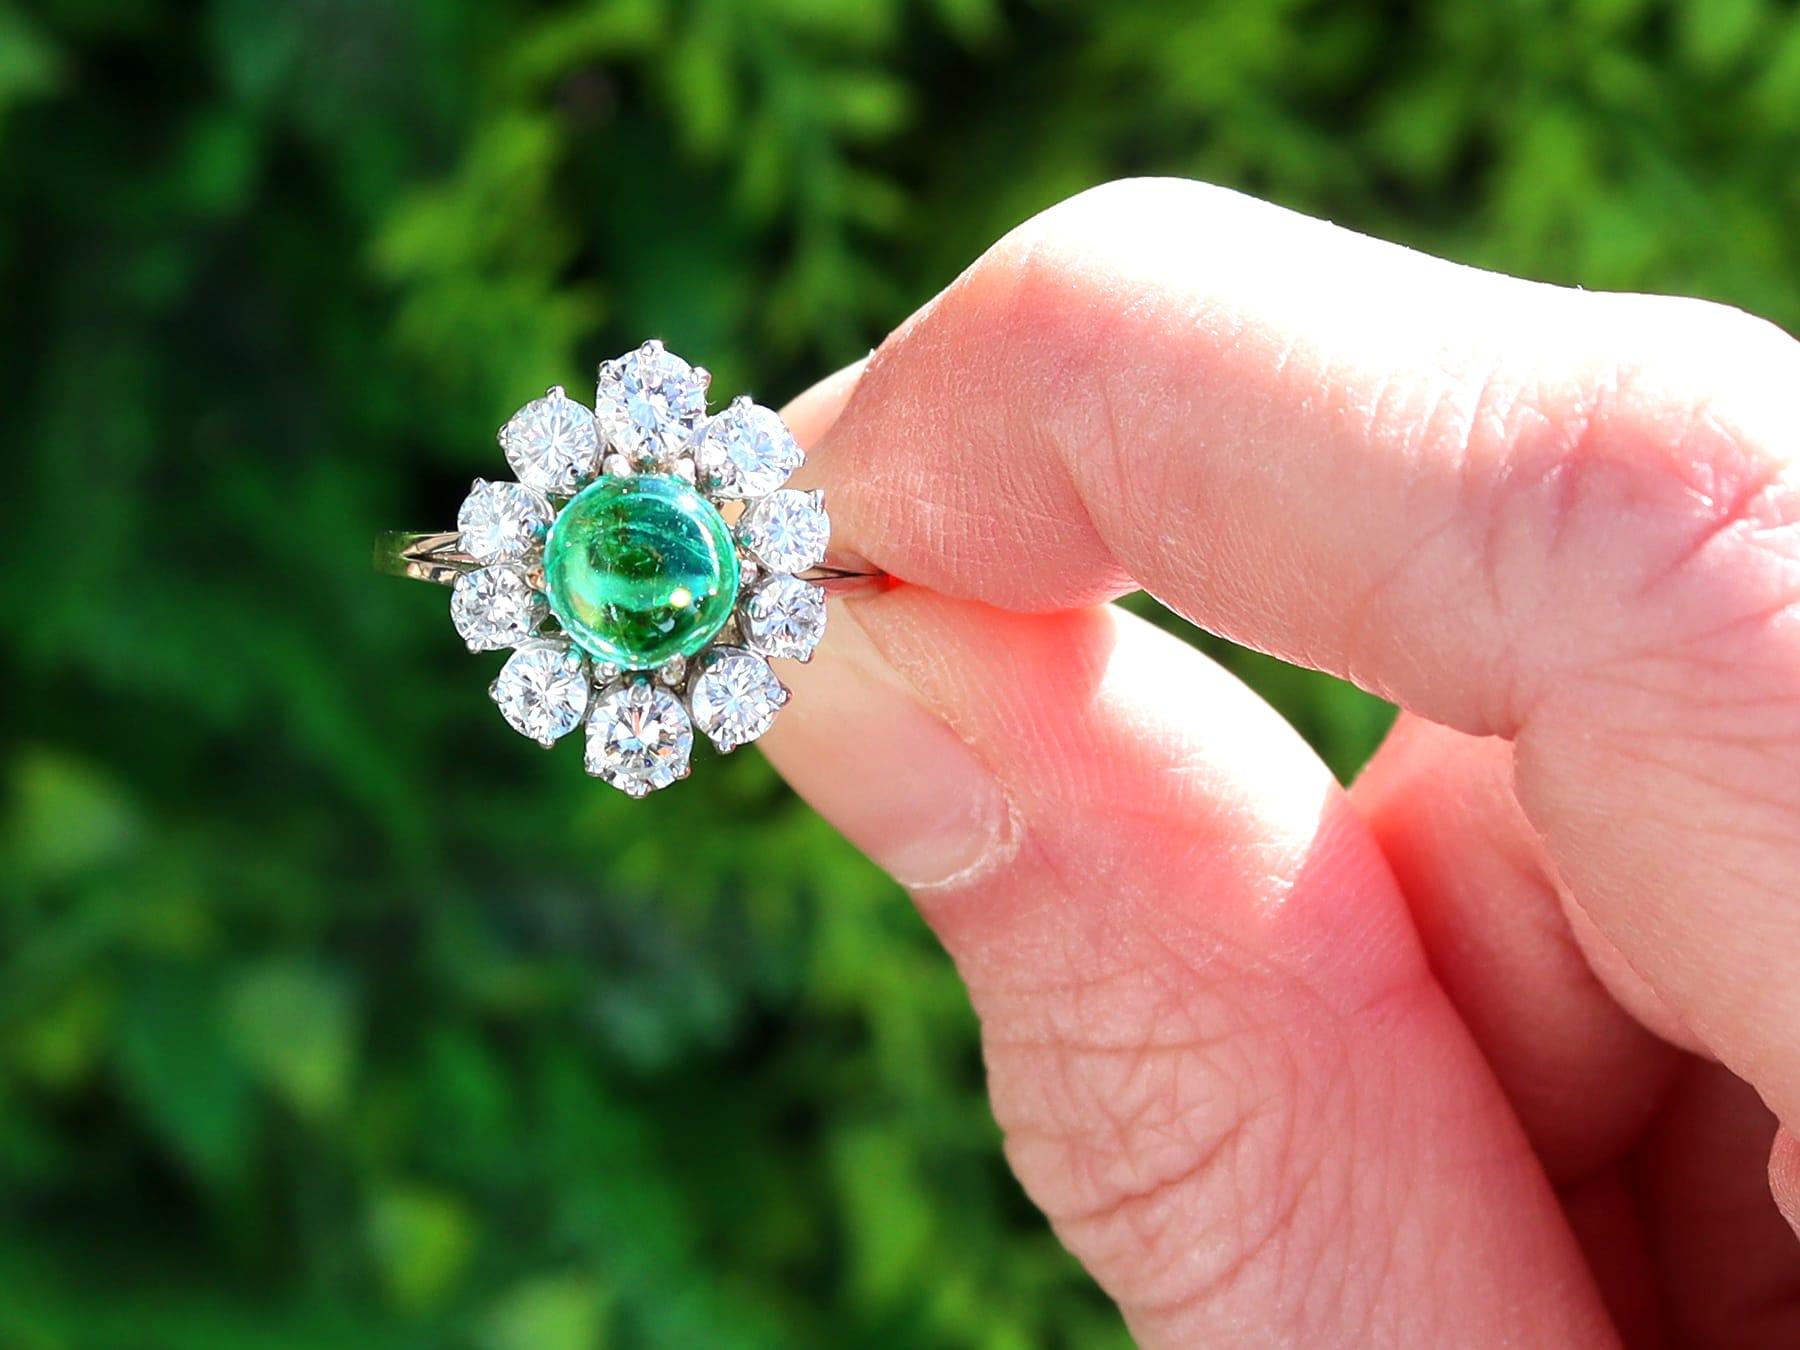 A stunning, fine and impressive vintage French 1.50 carat emerald and 2.40 carat diamond, 18 karat white gold and platinum set dress ring; part of our diverse vintage jewelry collections.

This stunning, fine and impressive vintage emerald cluster